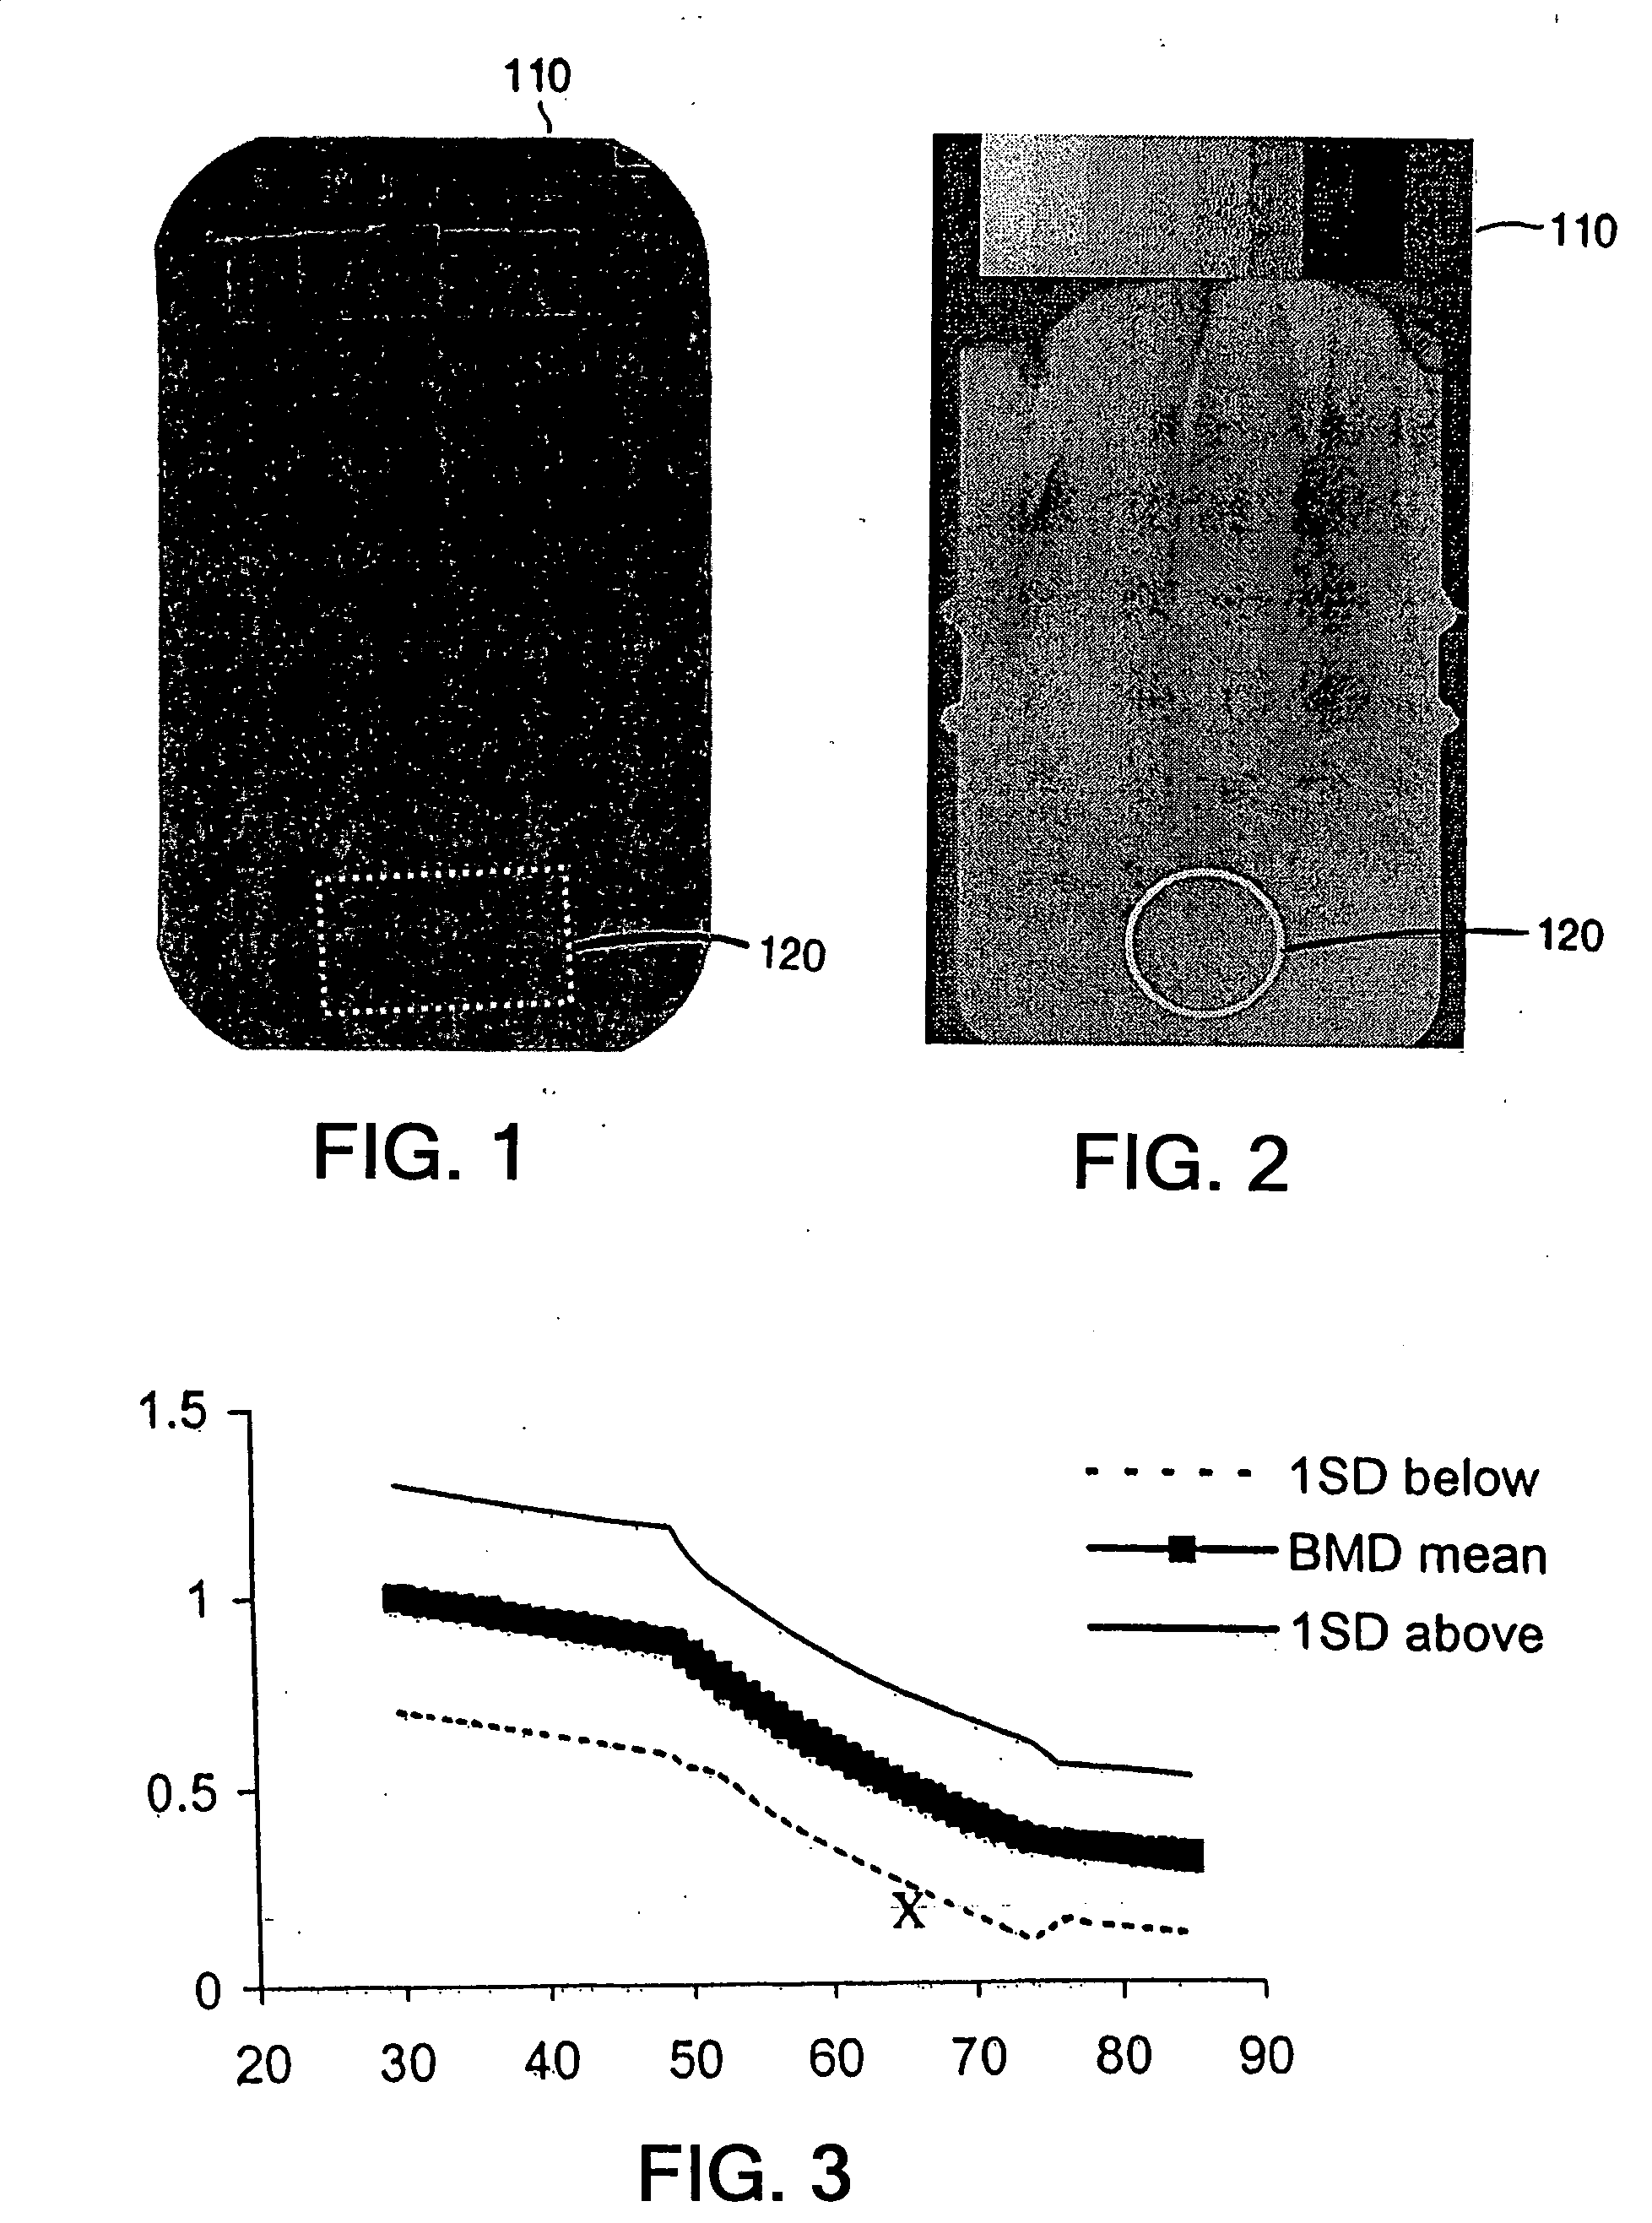 Methods for the compensation of imaging technique in the processing of radiographic images